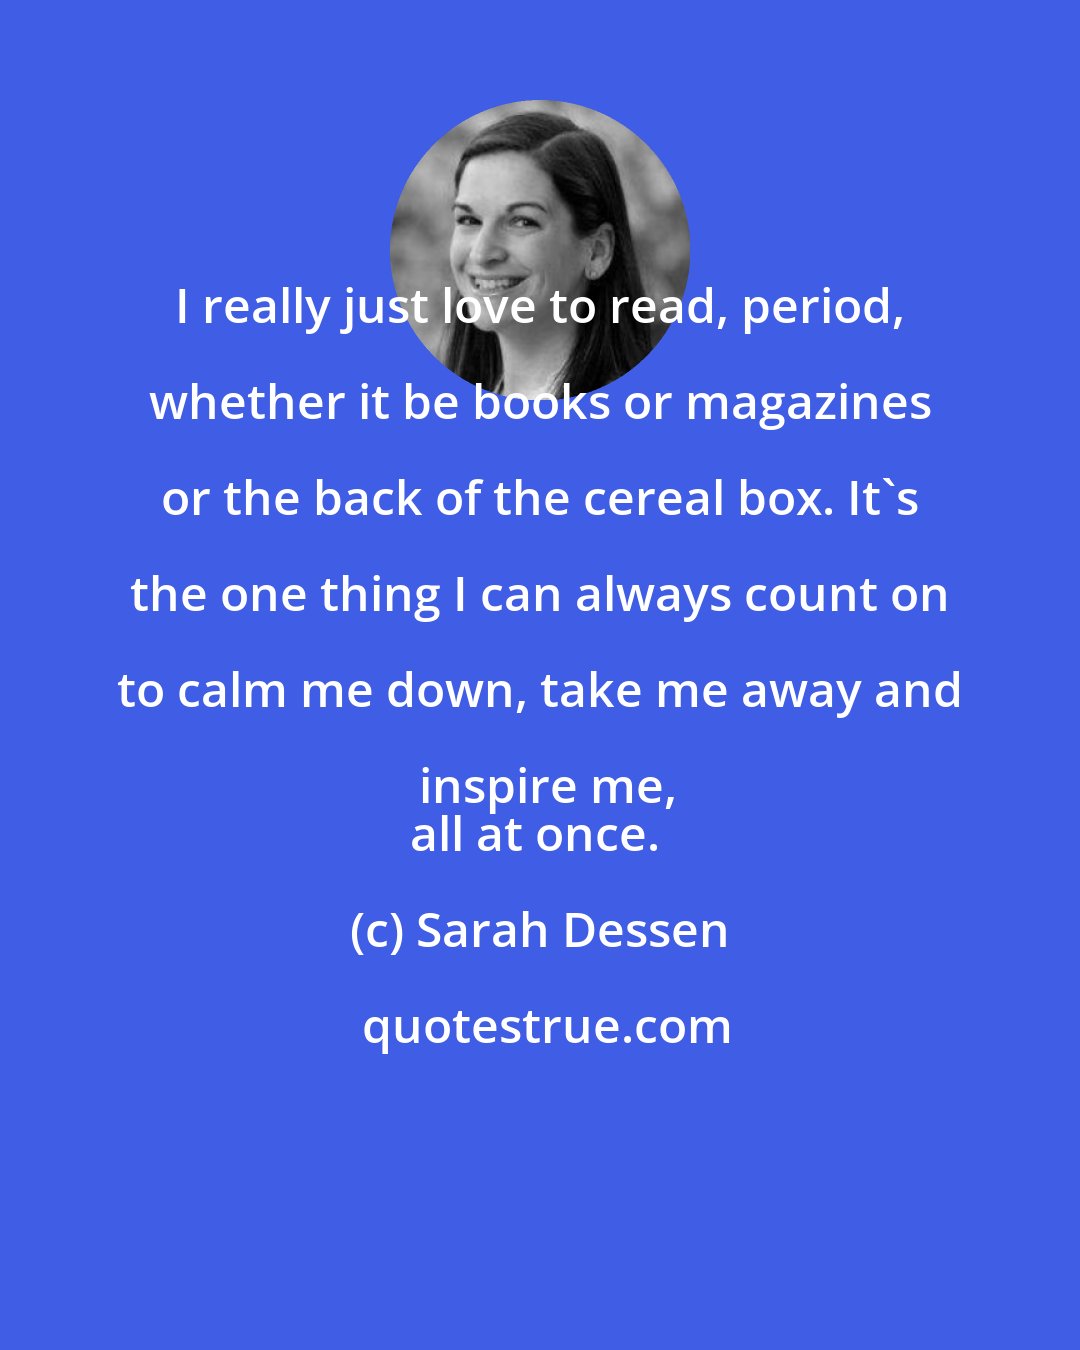 Sarah Dessen: I really just love to read, period, whether it be books or magazines or the back of the cereal box. It's the one thing I can always count on to calm me down, take me away and inspire me,
all at once.